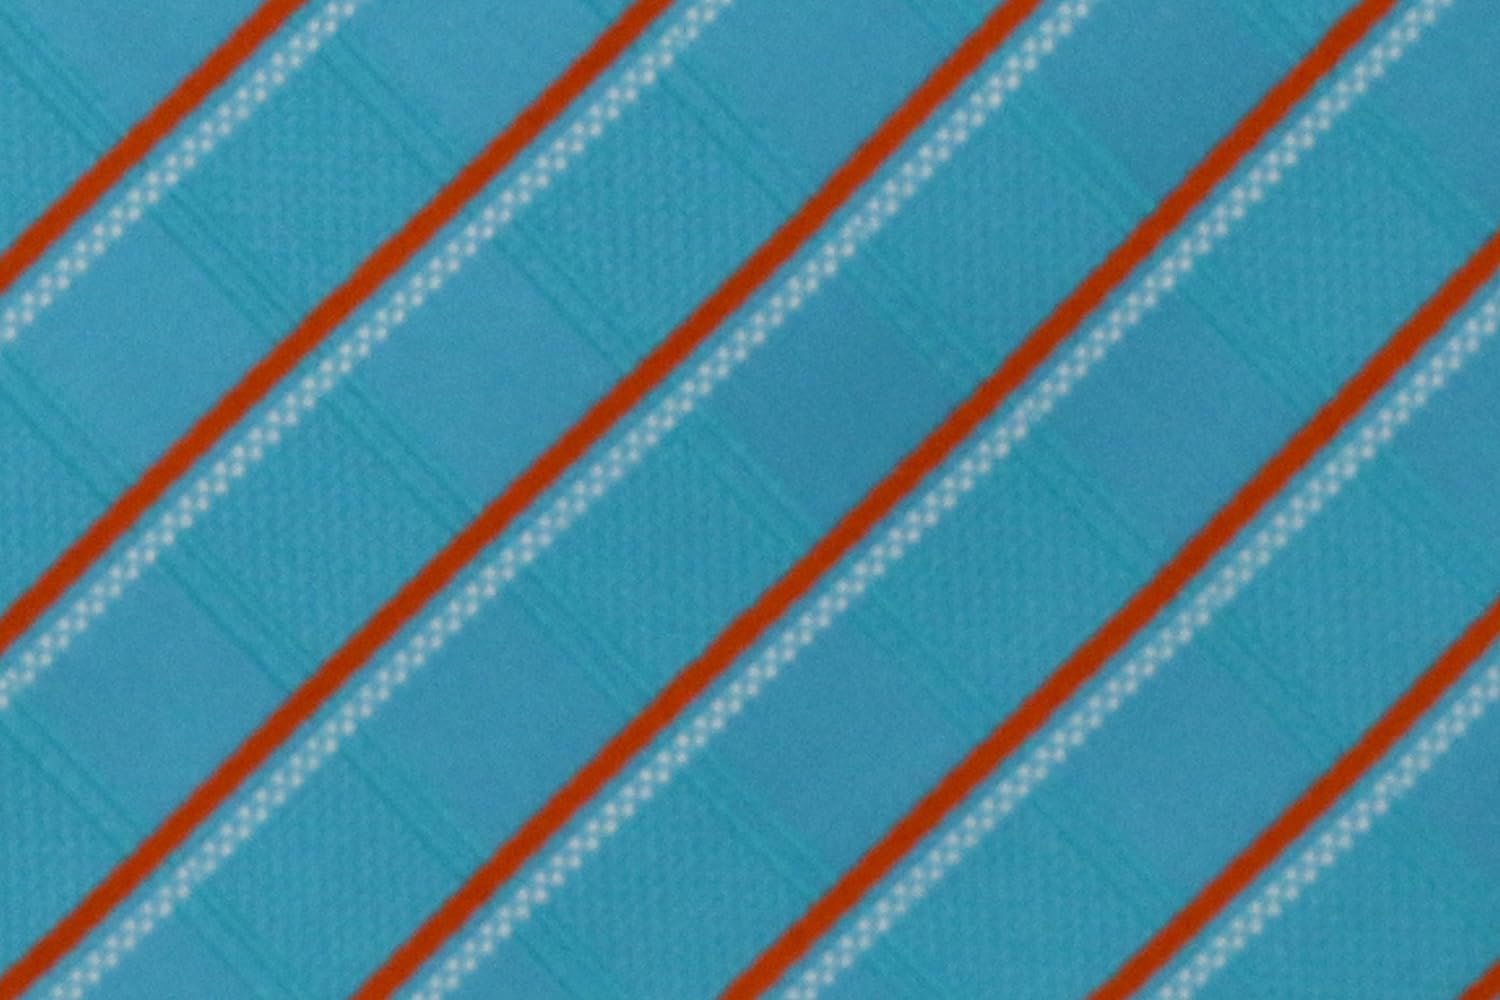 100% Silk Extra Long Teal Necktie with Orange Stripes (63 Inches)